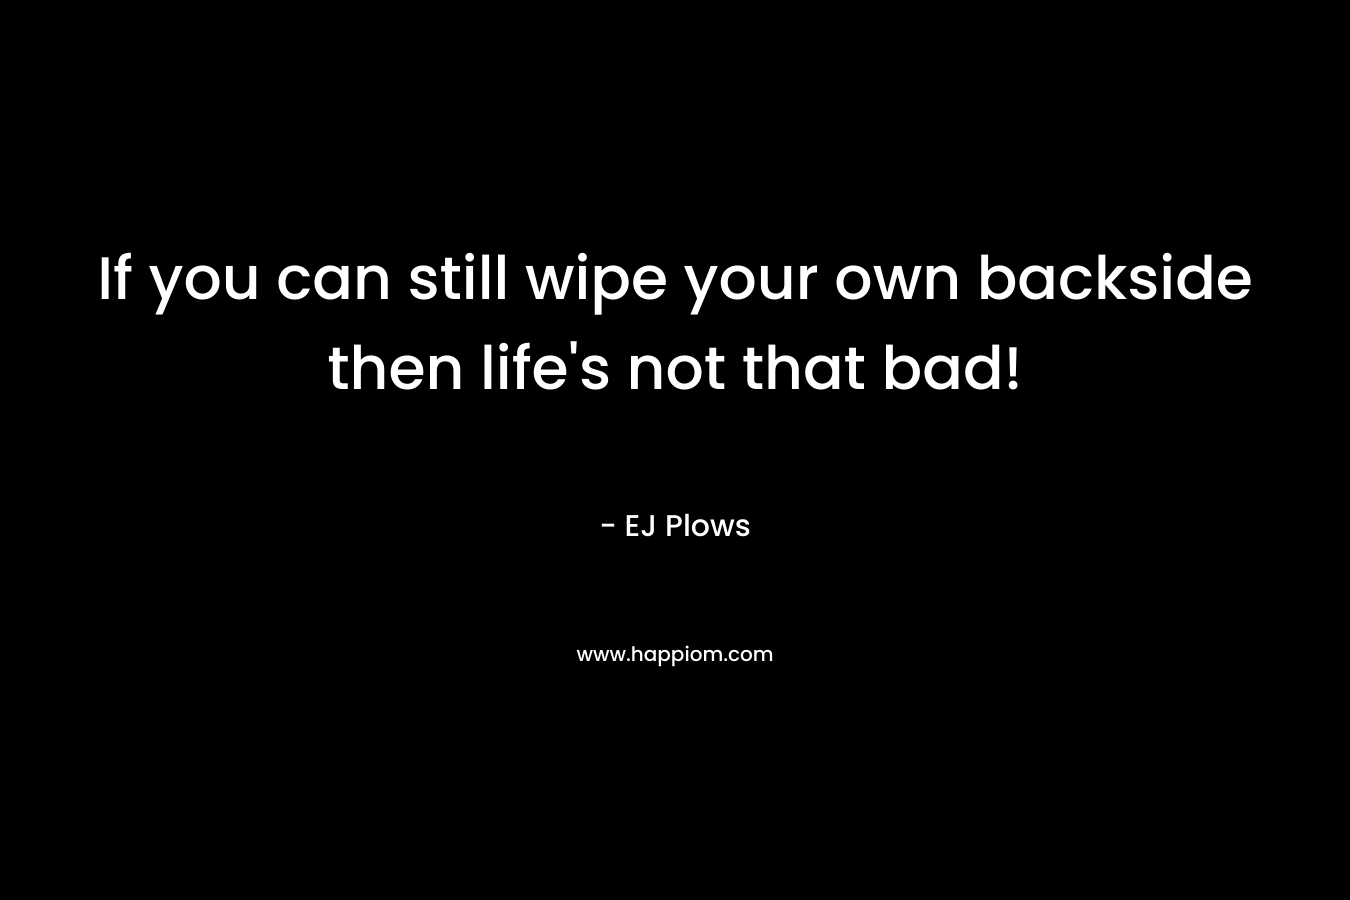 If you can still wipe your own backside then life’s not that bad! – EJ Plows